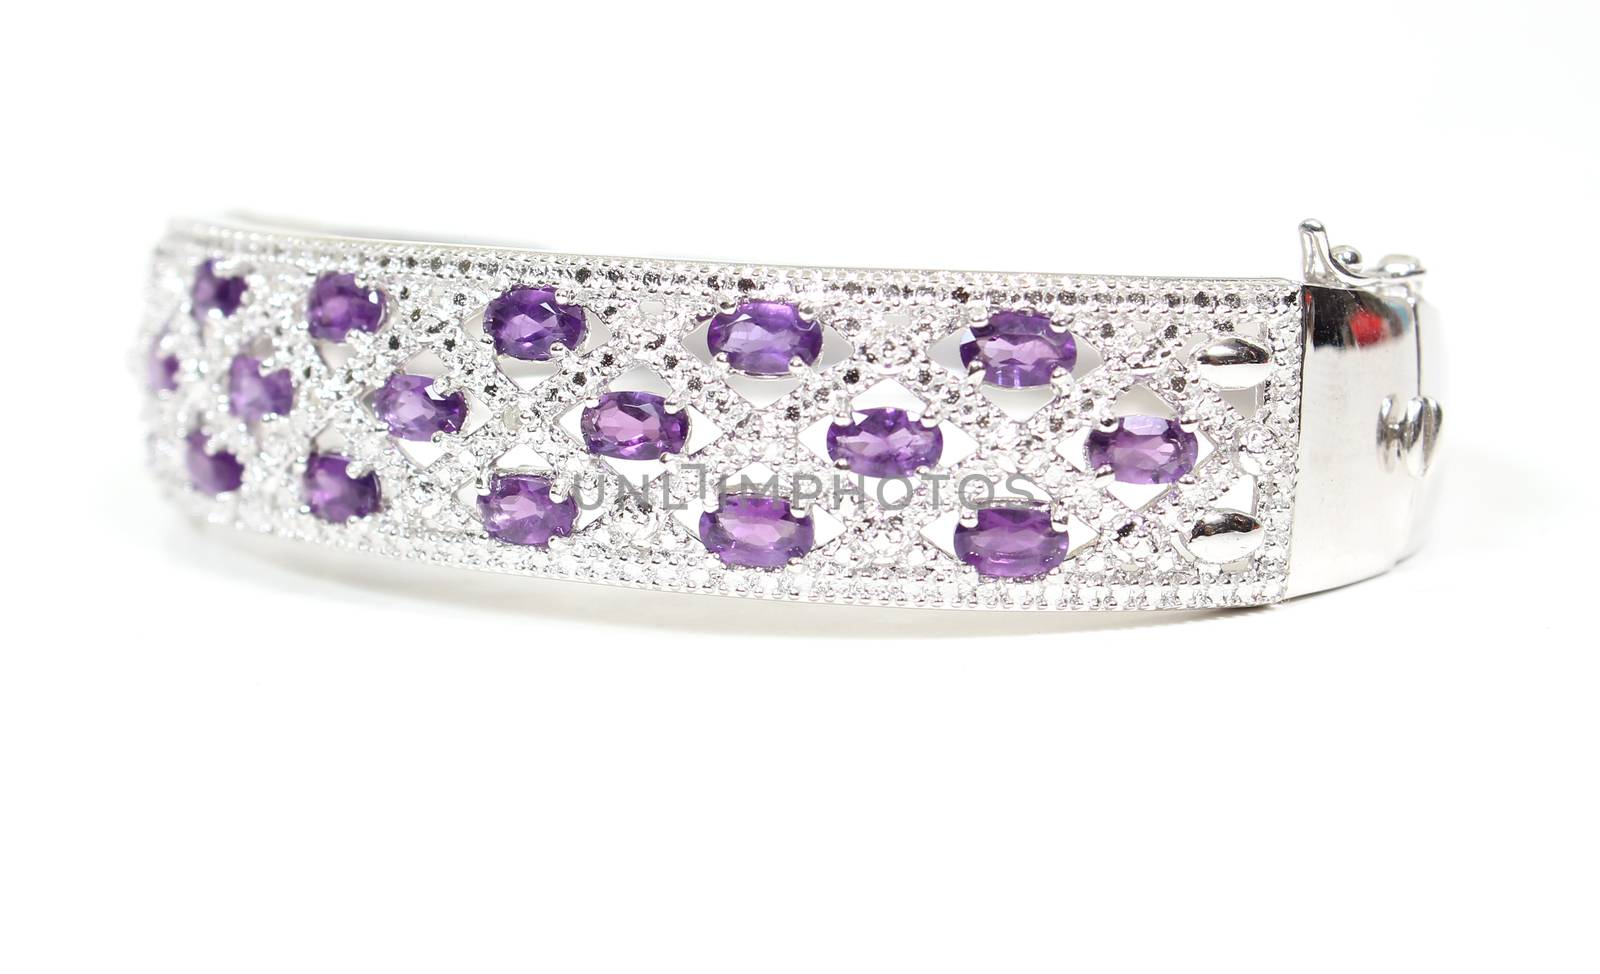 Sterling Silver and Amethyst Bangle Bracelet on White Background